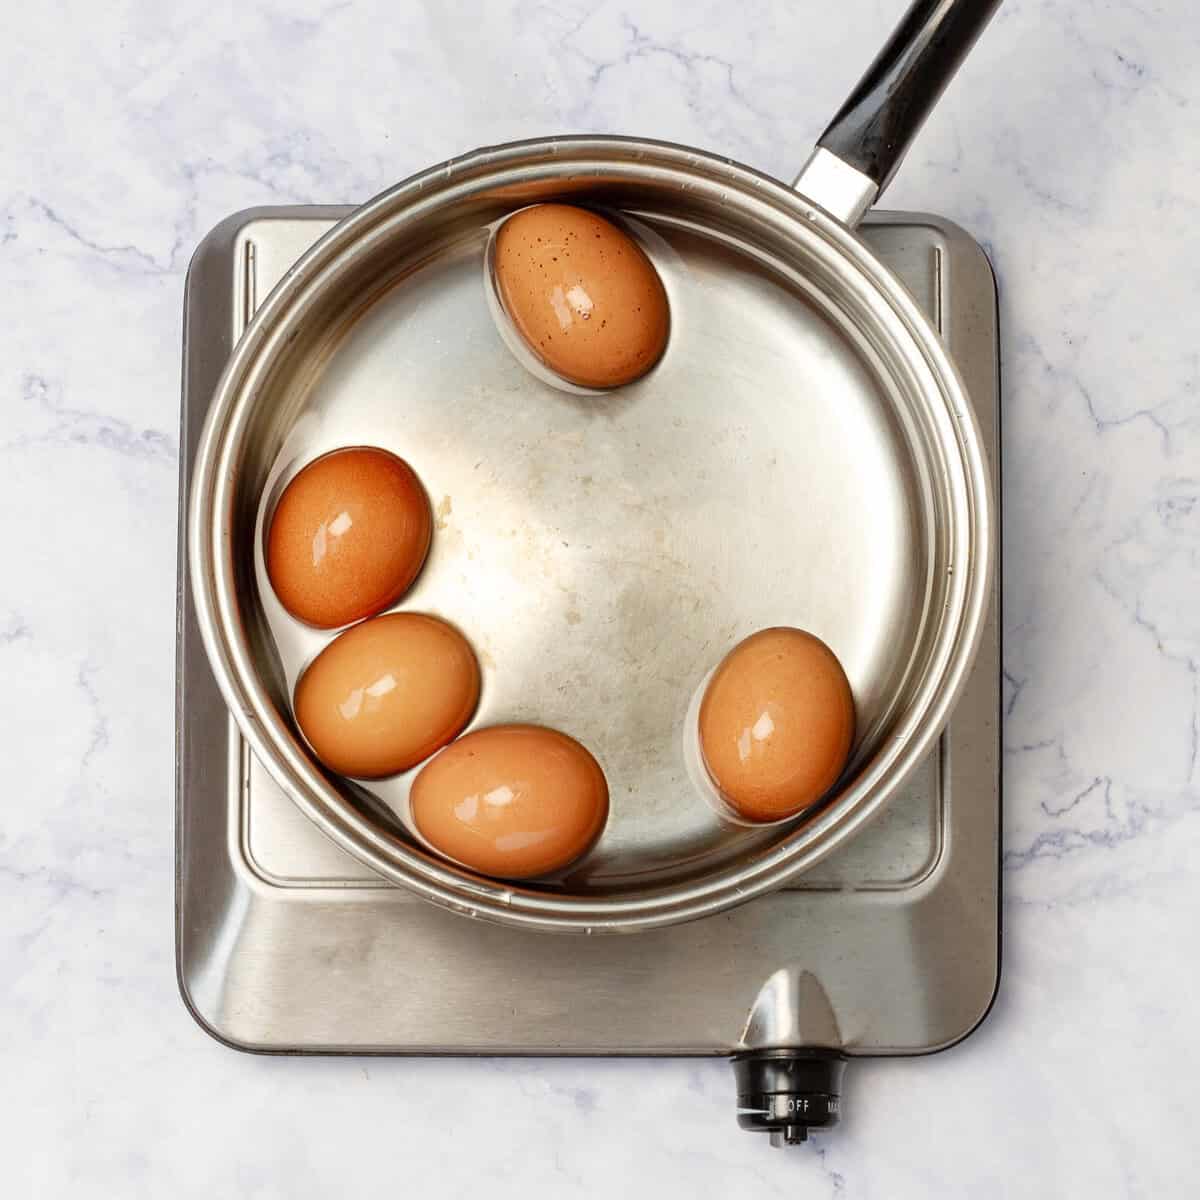 Cook the eggs in skillet